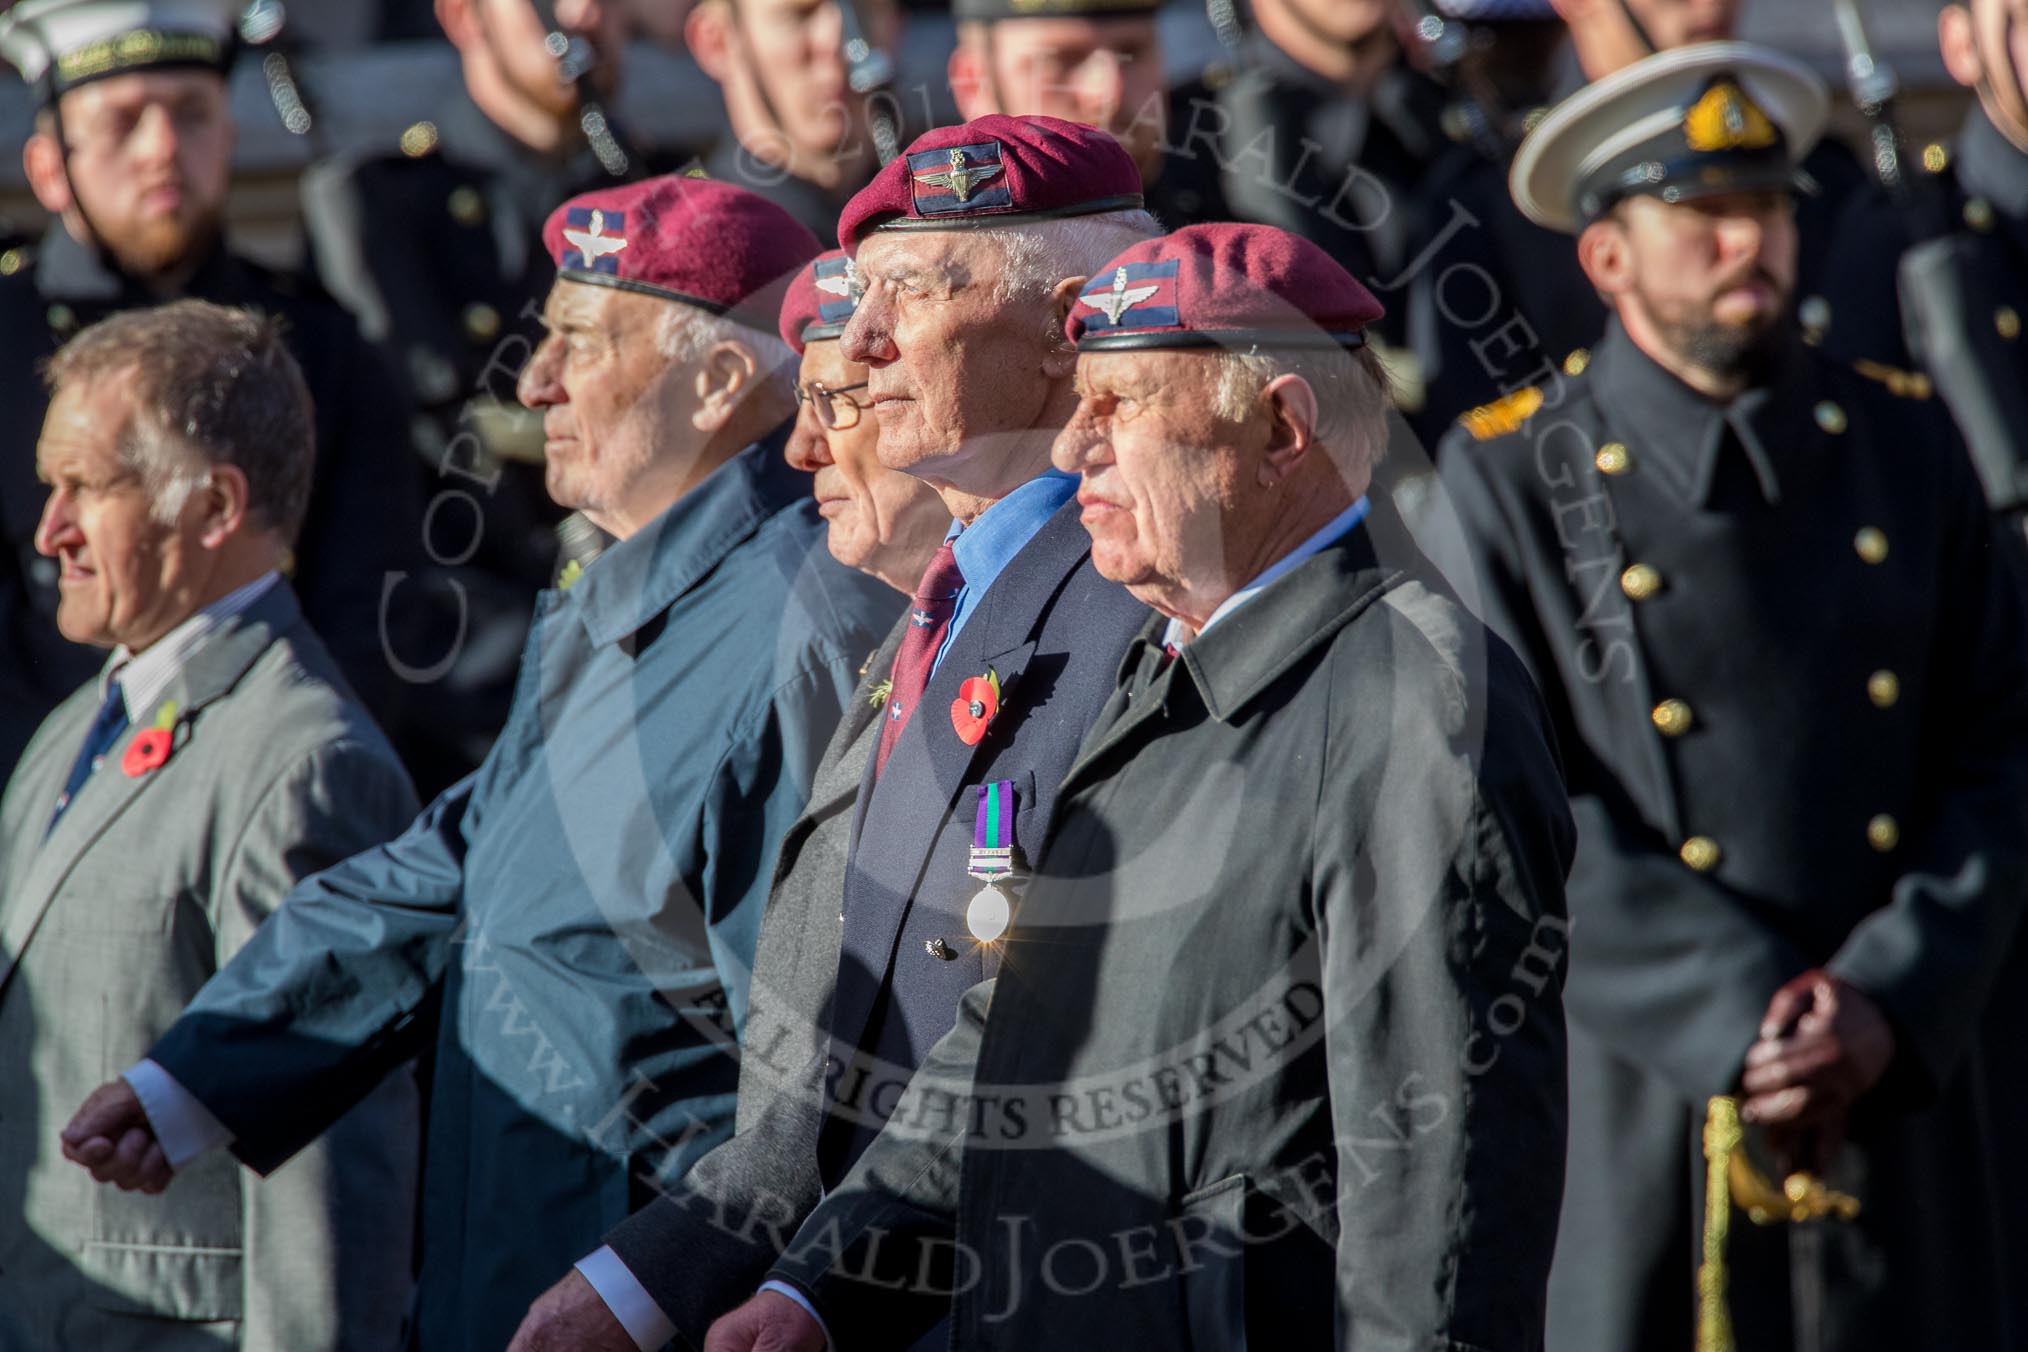 Guards Parachute Association (Group A20, 24 members) during the Royal British Legion March Past on Remembrance Sunday at the Cenotaph, Whitehall, Westminster, London, 11 November 2018, 11:59.